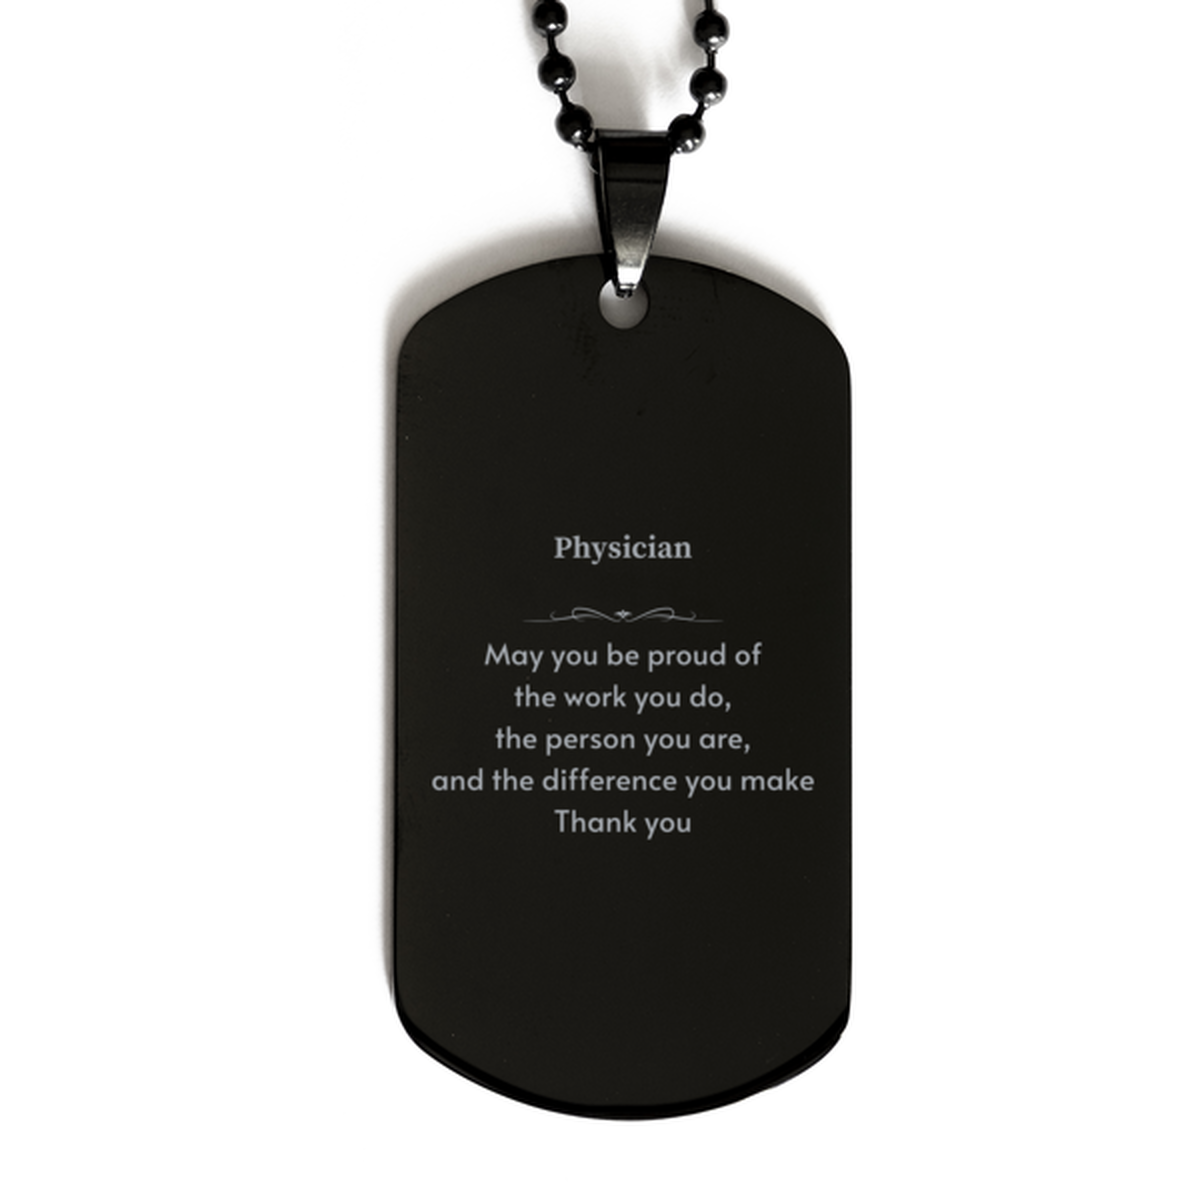 Heartwarming Black Dog Tag Retirement Coworkers Gifts for Physician, Physician May You be proud of the work you do, the person you are Gifts for Boss Men Women Friends